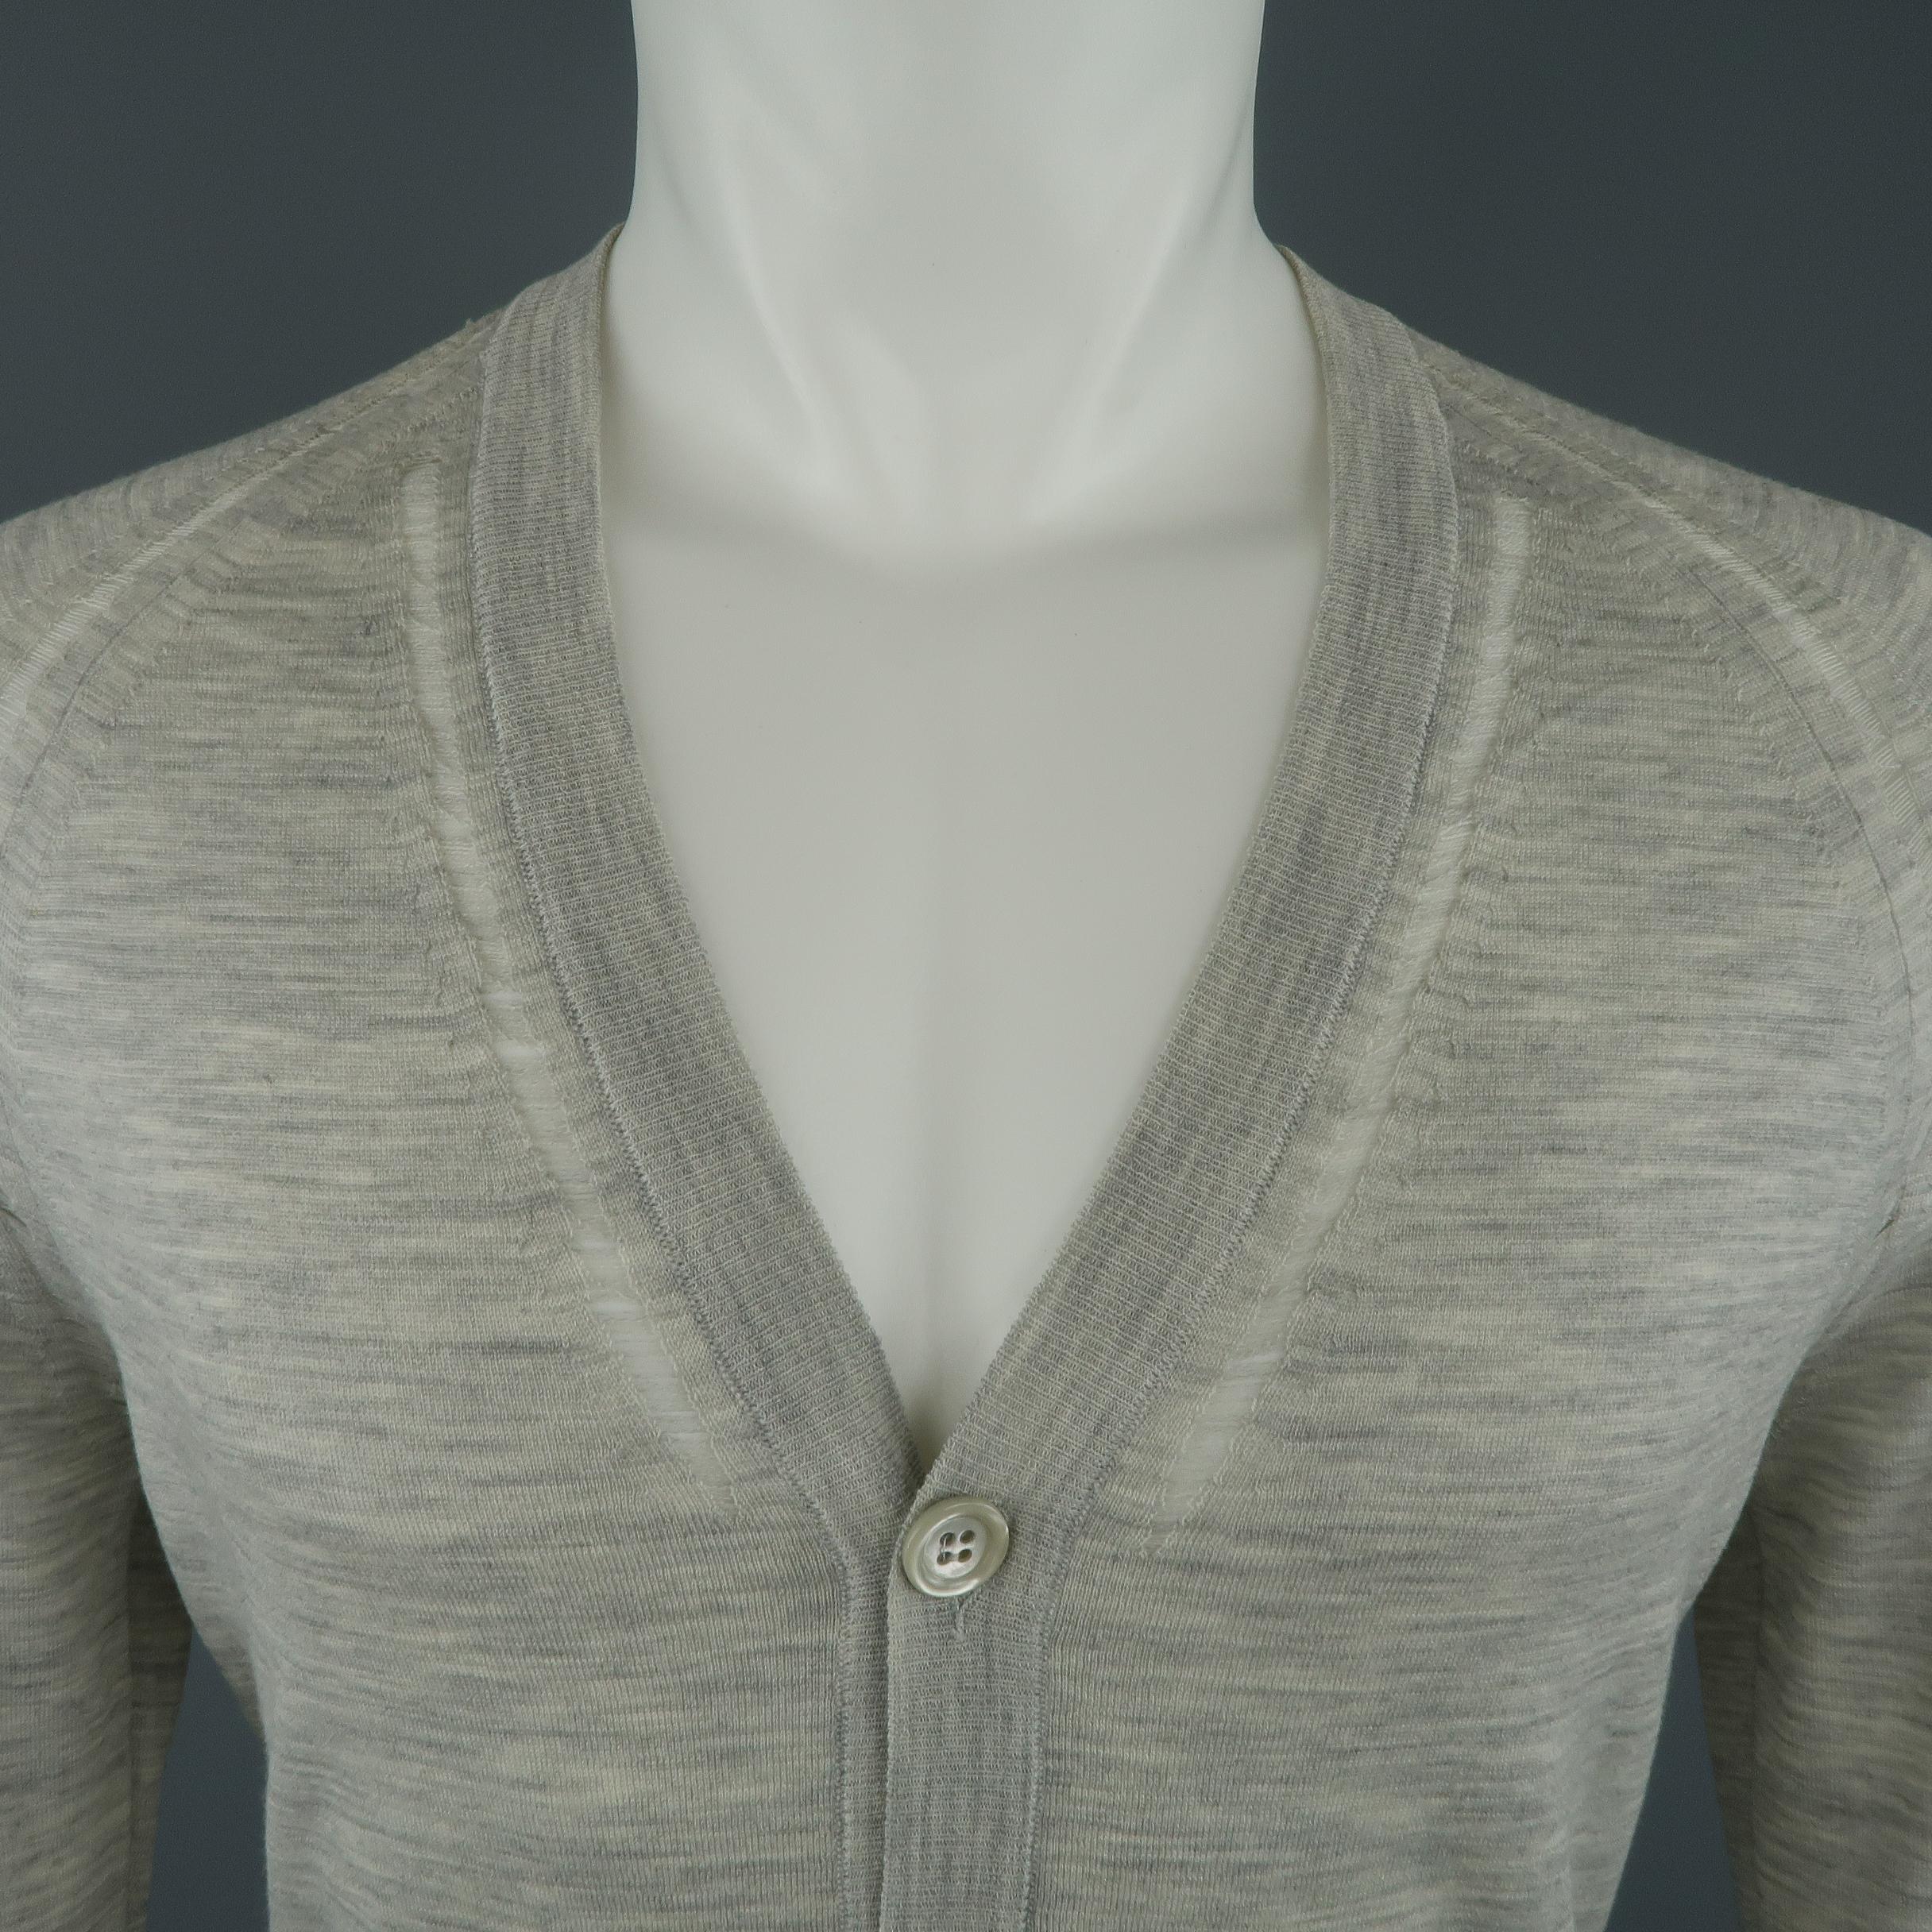 DIOR HOMME cardigan comes in light heather gray wool knit with a V neck, button up front, pockets, and distressed shredded run trim details. Faint discolorations on cuffs. As-is. Made in Italy.
 
Good Pre-Owned Condition.
Marked: S
 
Measurements:
